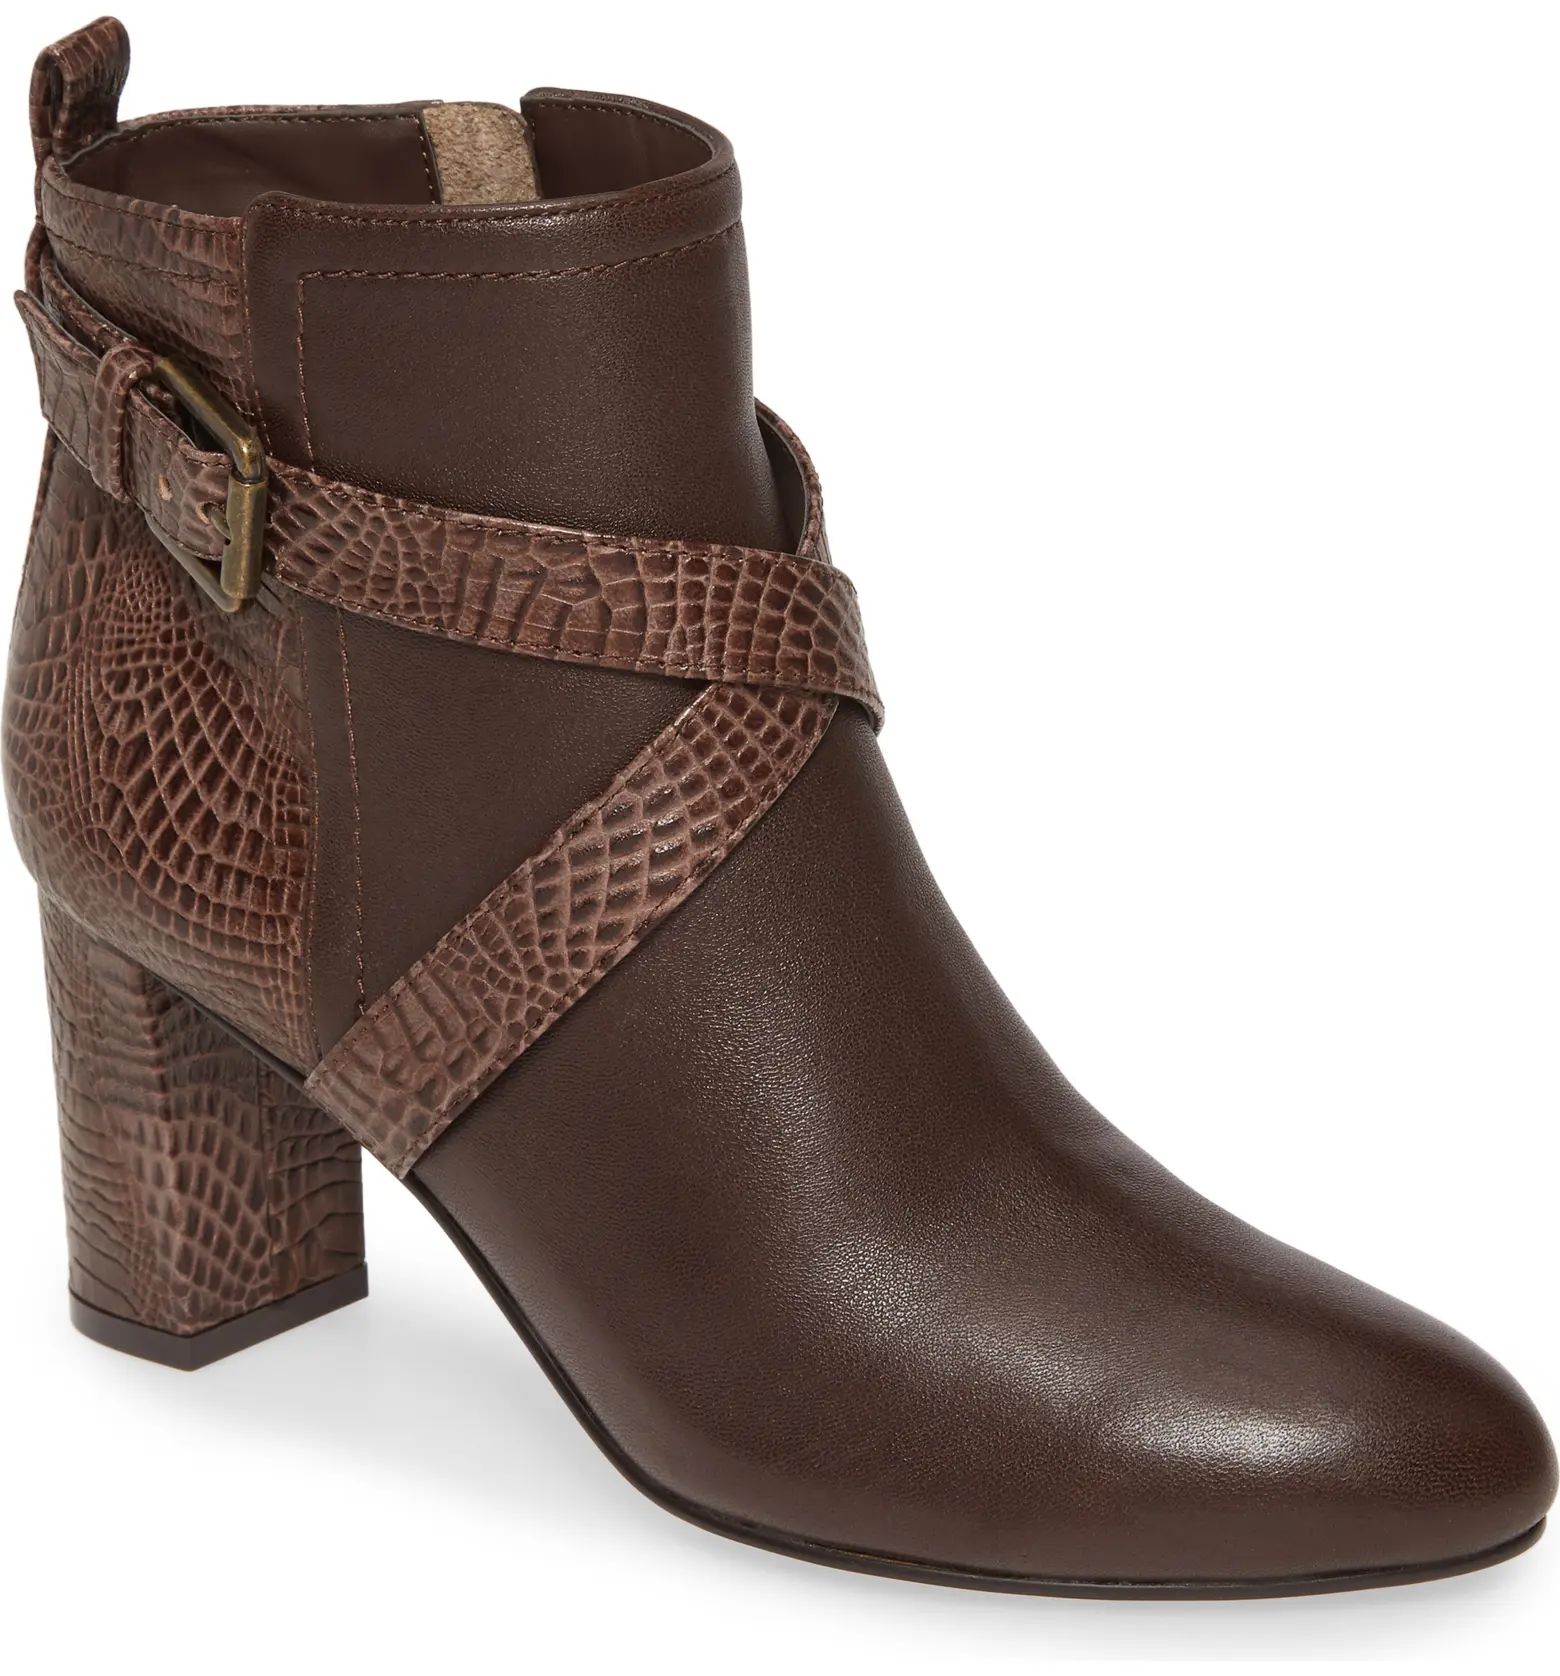 Inspire Snake Embossed Bootie - Multiple Widths Available | Nordstrom Rack